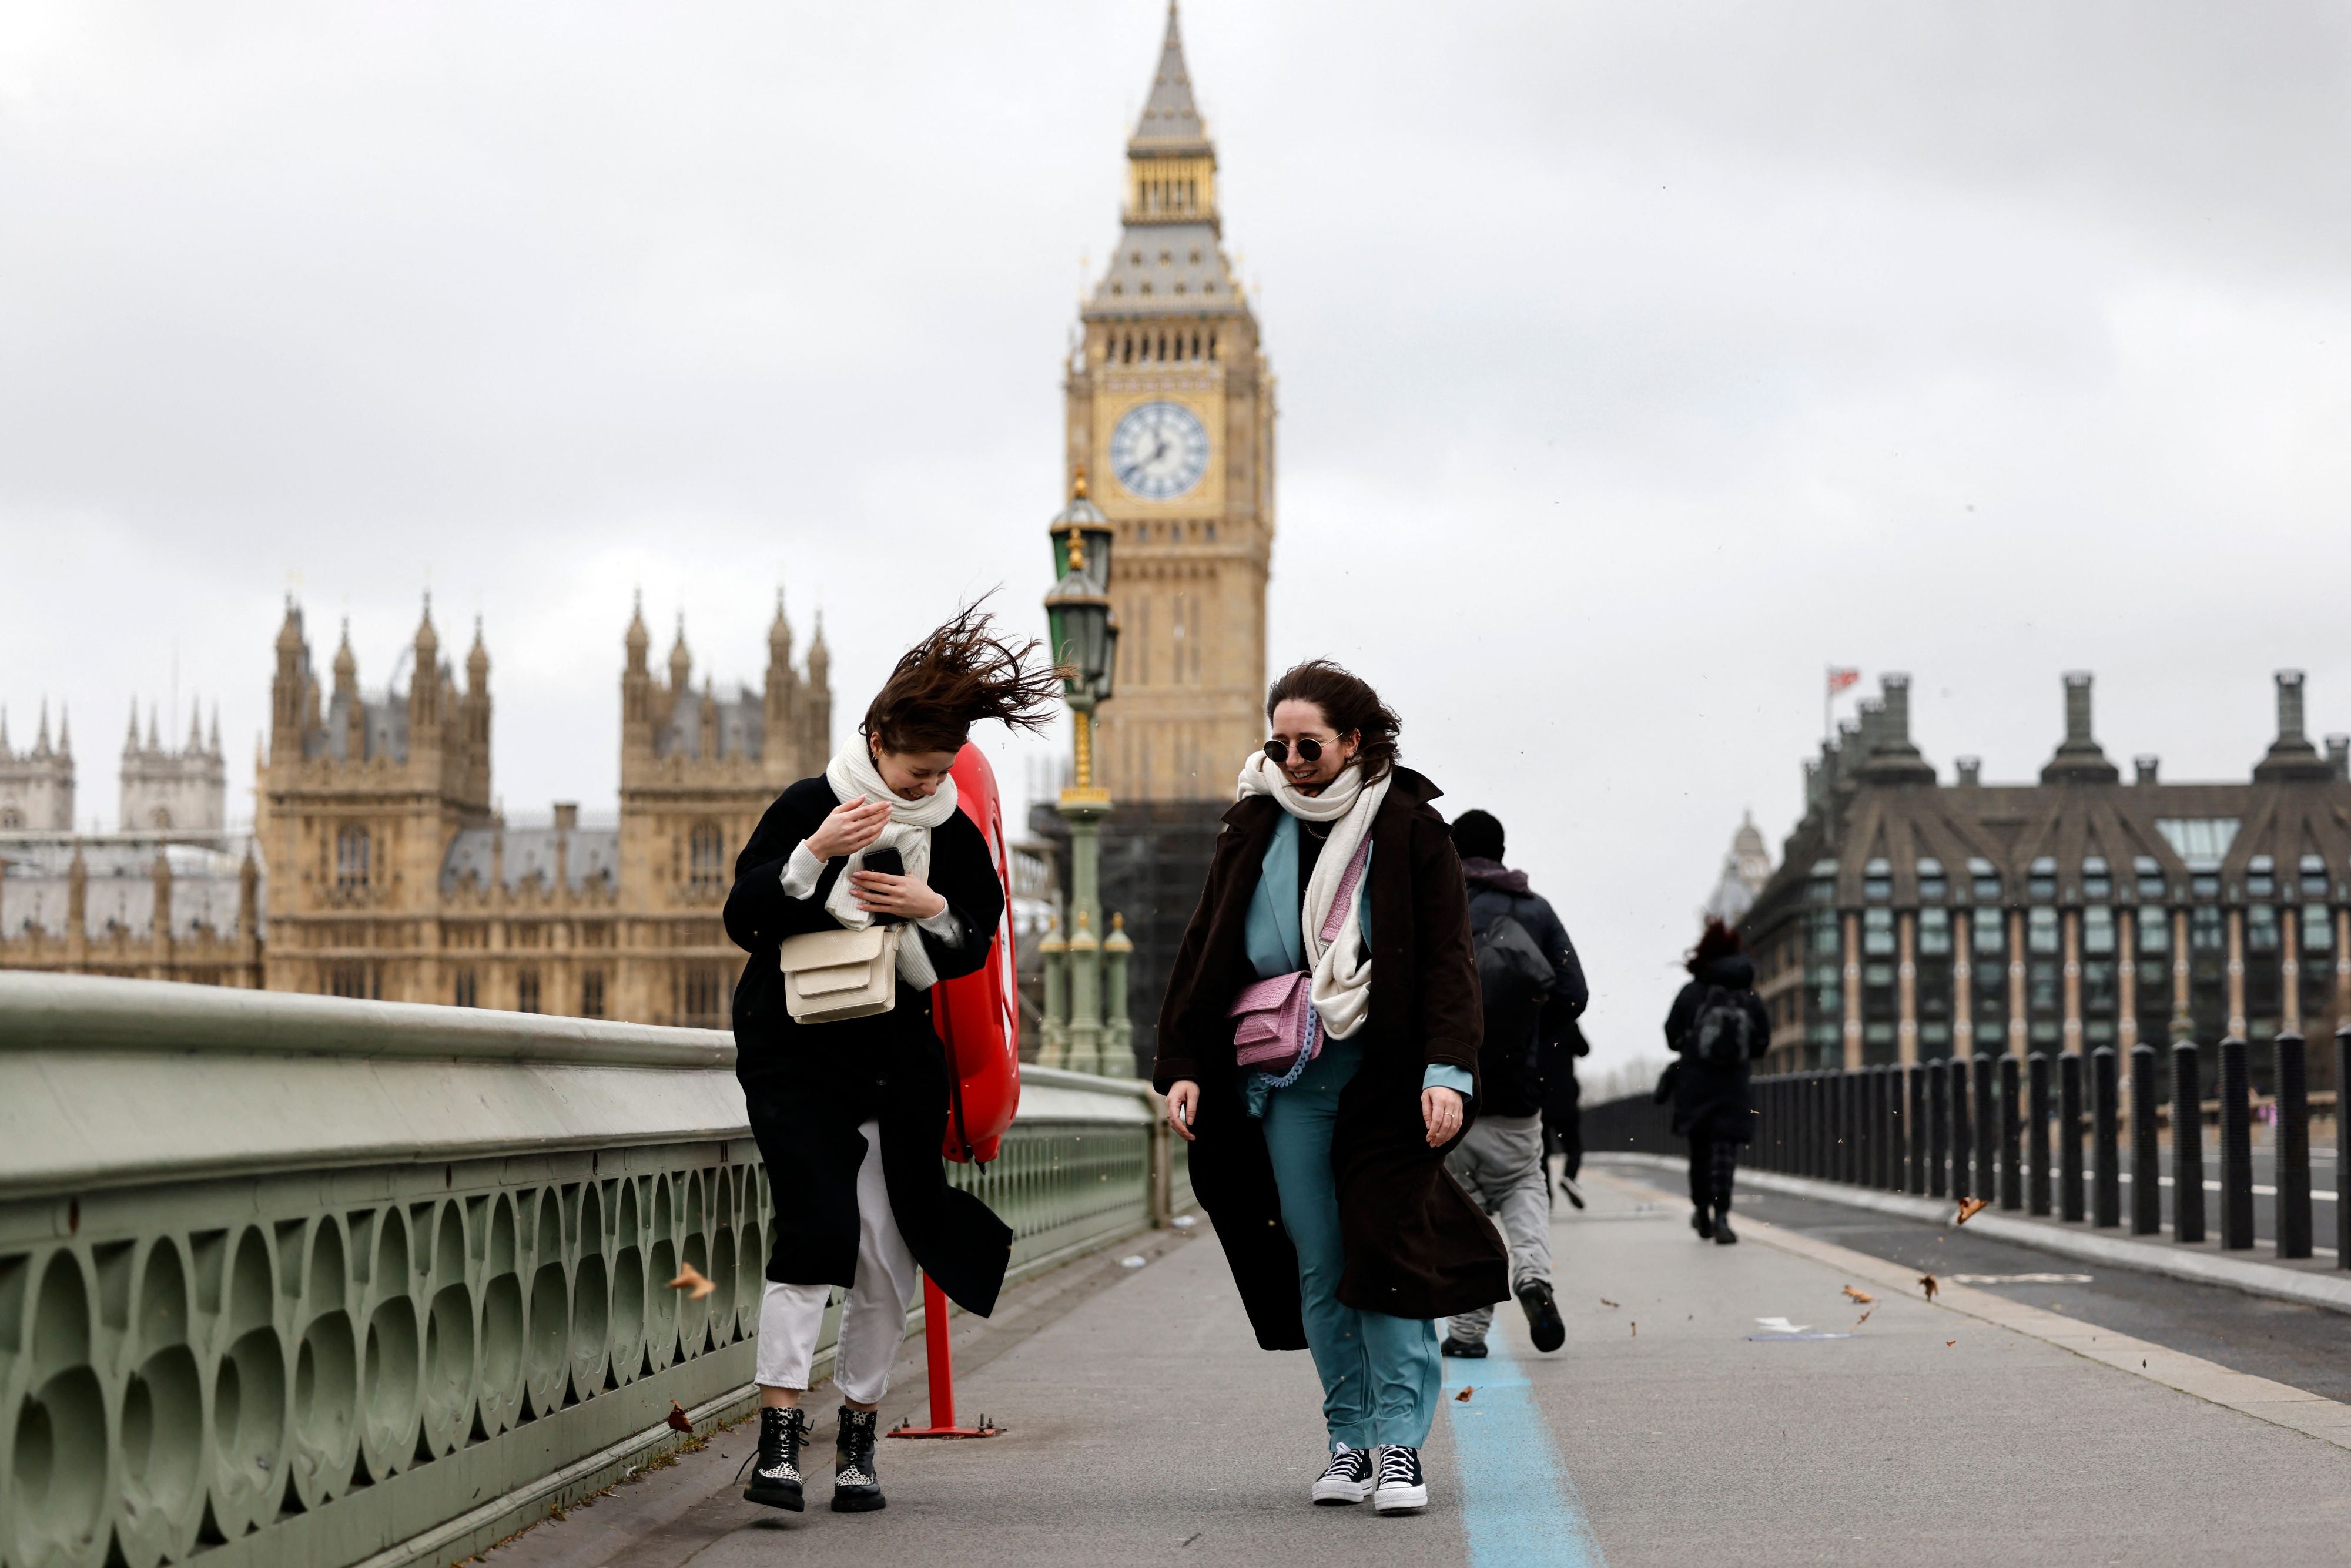 People struggle in the wind as they walk across Westminster Bridge, near the Houses of Parliament in central London